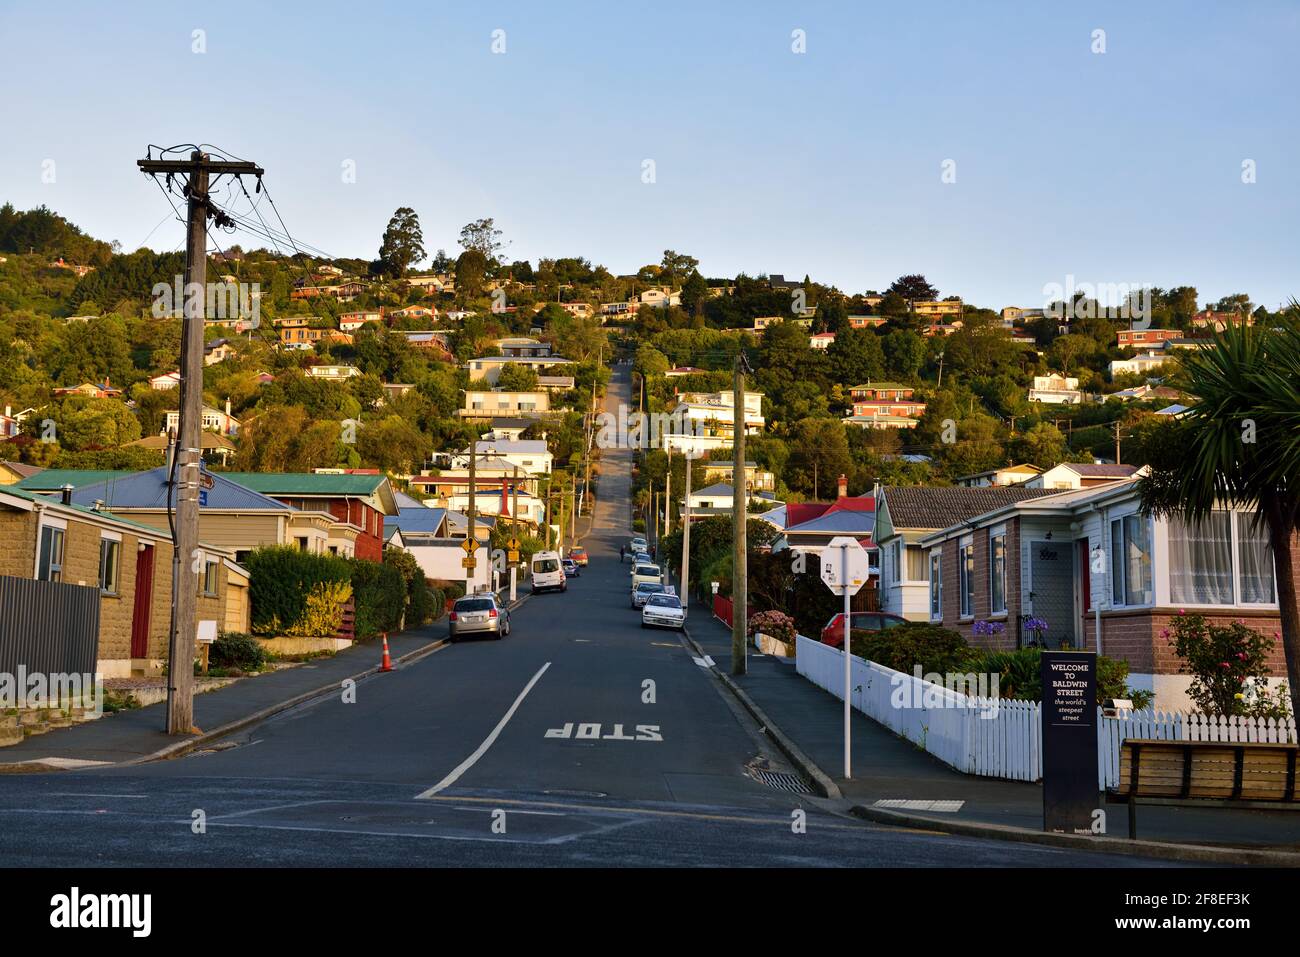 Baldwin Street, in Dunedin, New Zealand is the world's steepest residential street, according to the Guinness World Records. It is located in the resi Stock Photo